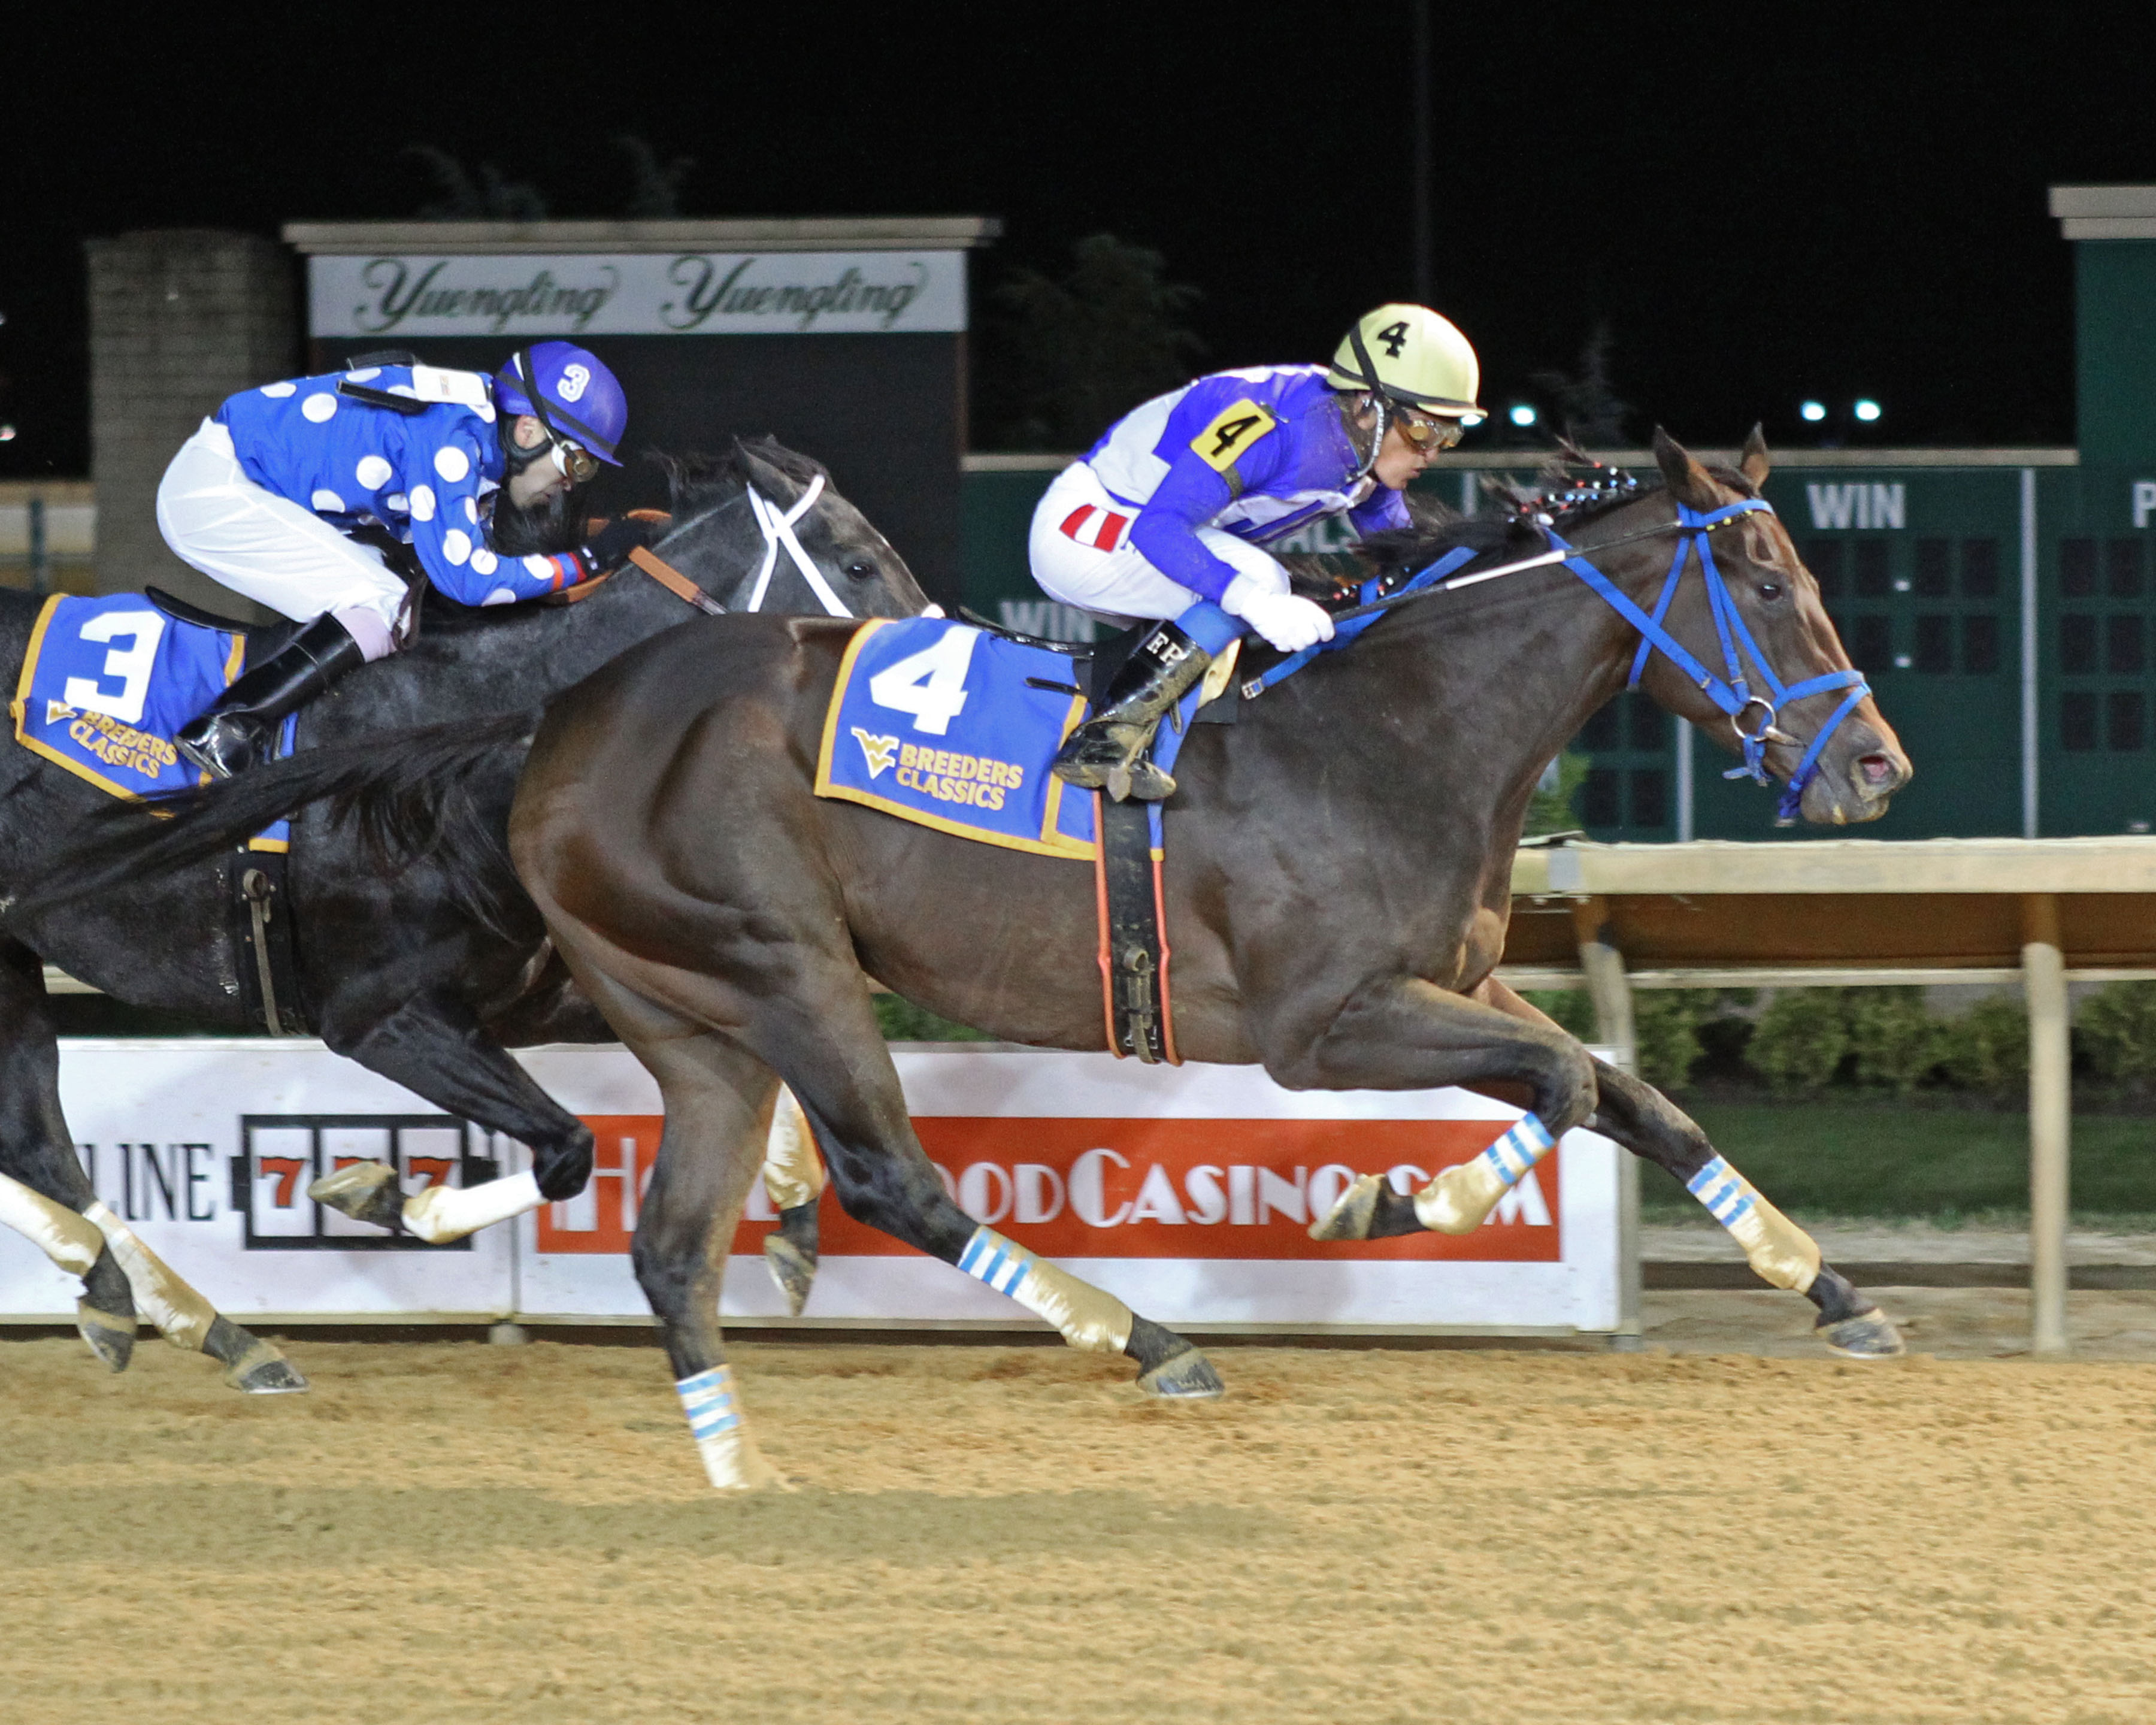 Late Night Pow Wow prevails in Cavada thriller